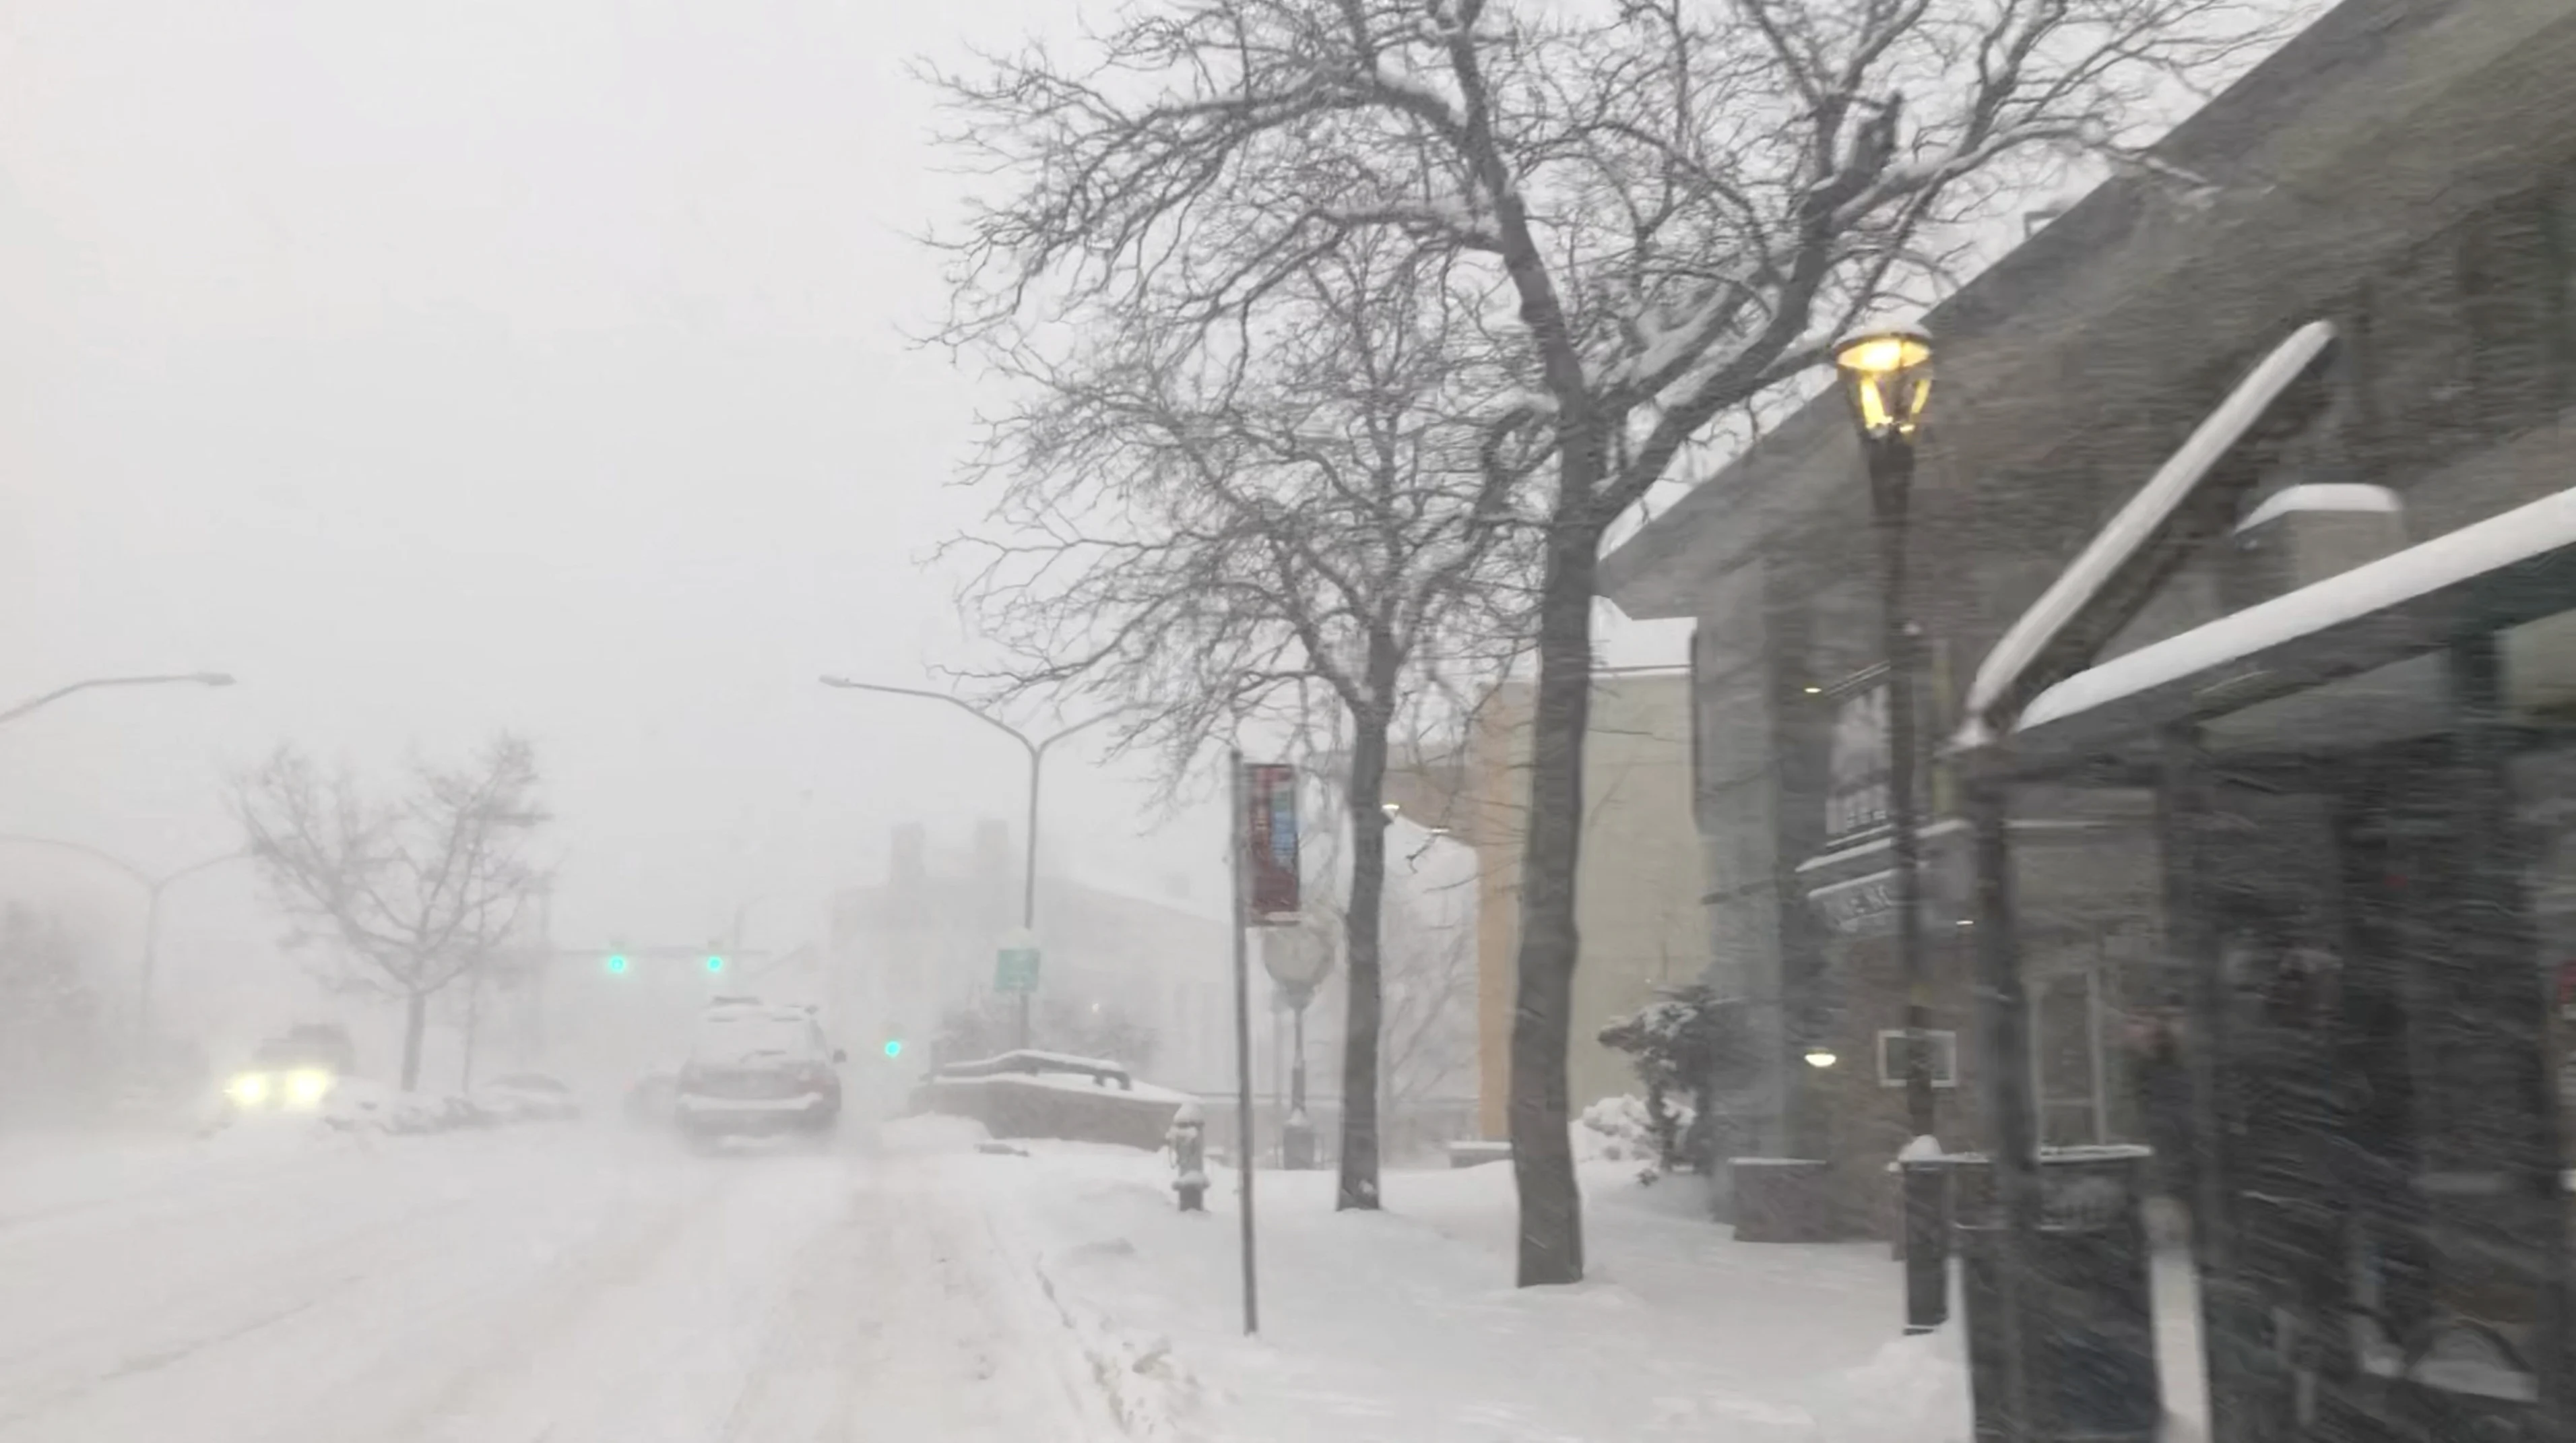 REUTERS: A view shows a snow-covered road, in Boulder, Colorado, U.S., February 23, 2023, in this still image taken from a video obtained from social media. Dr. Angelica Kalika/via REUTERS